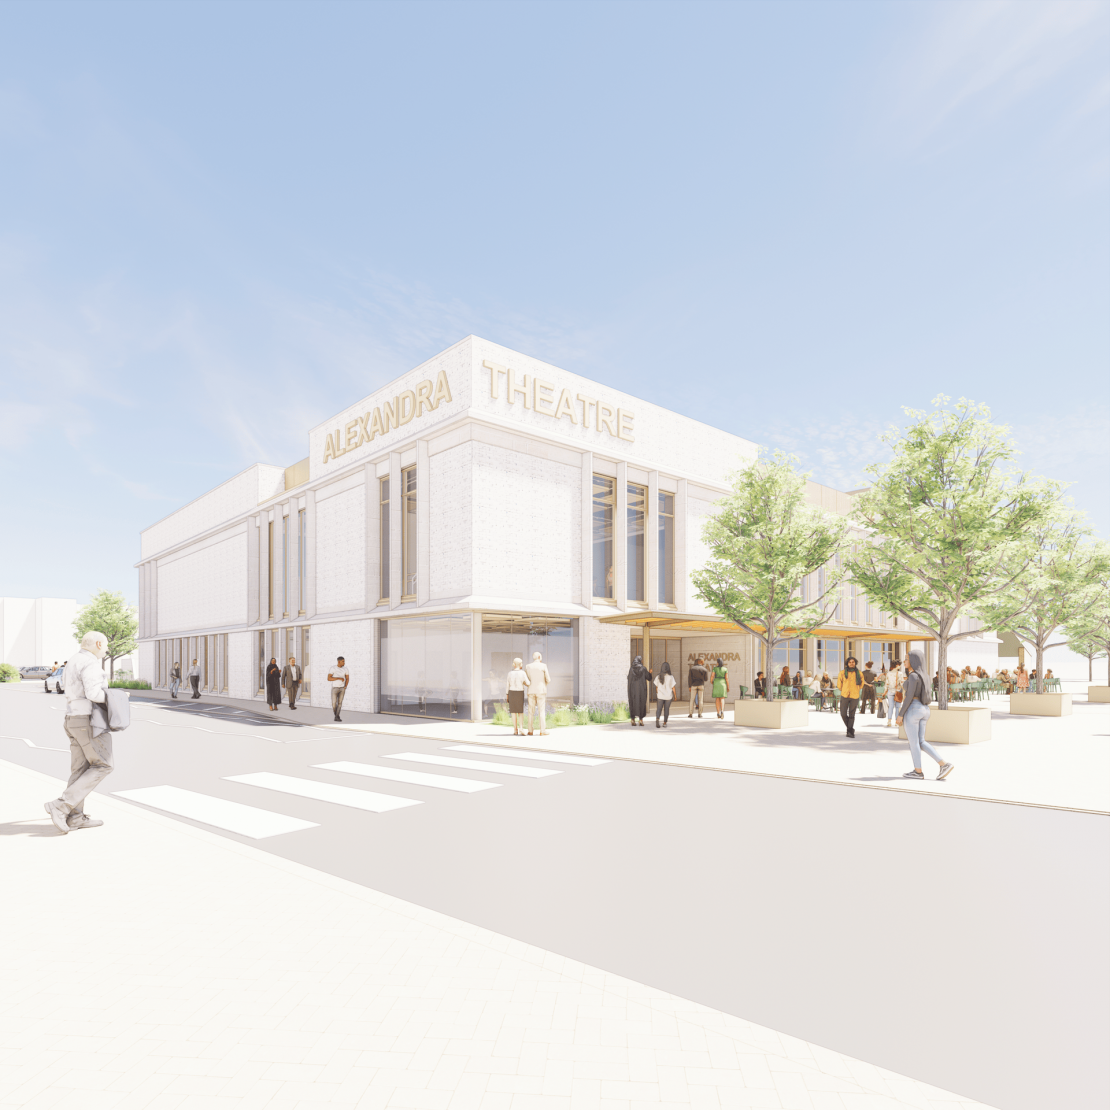 Proposed view of new theatre building